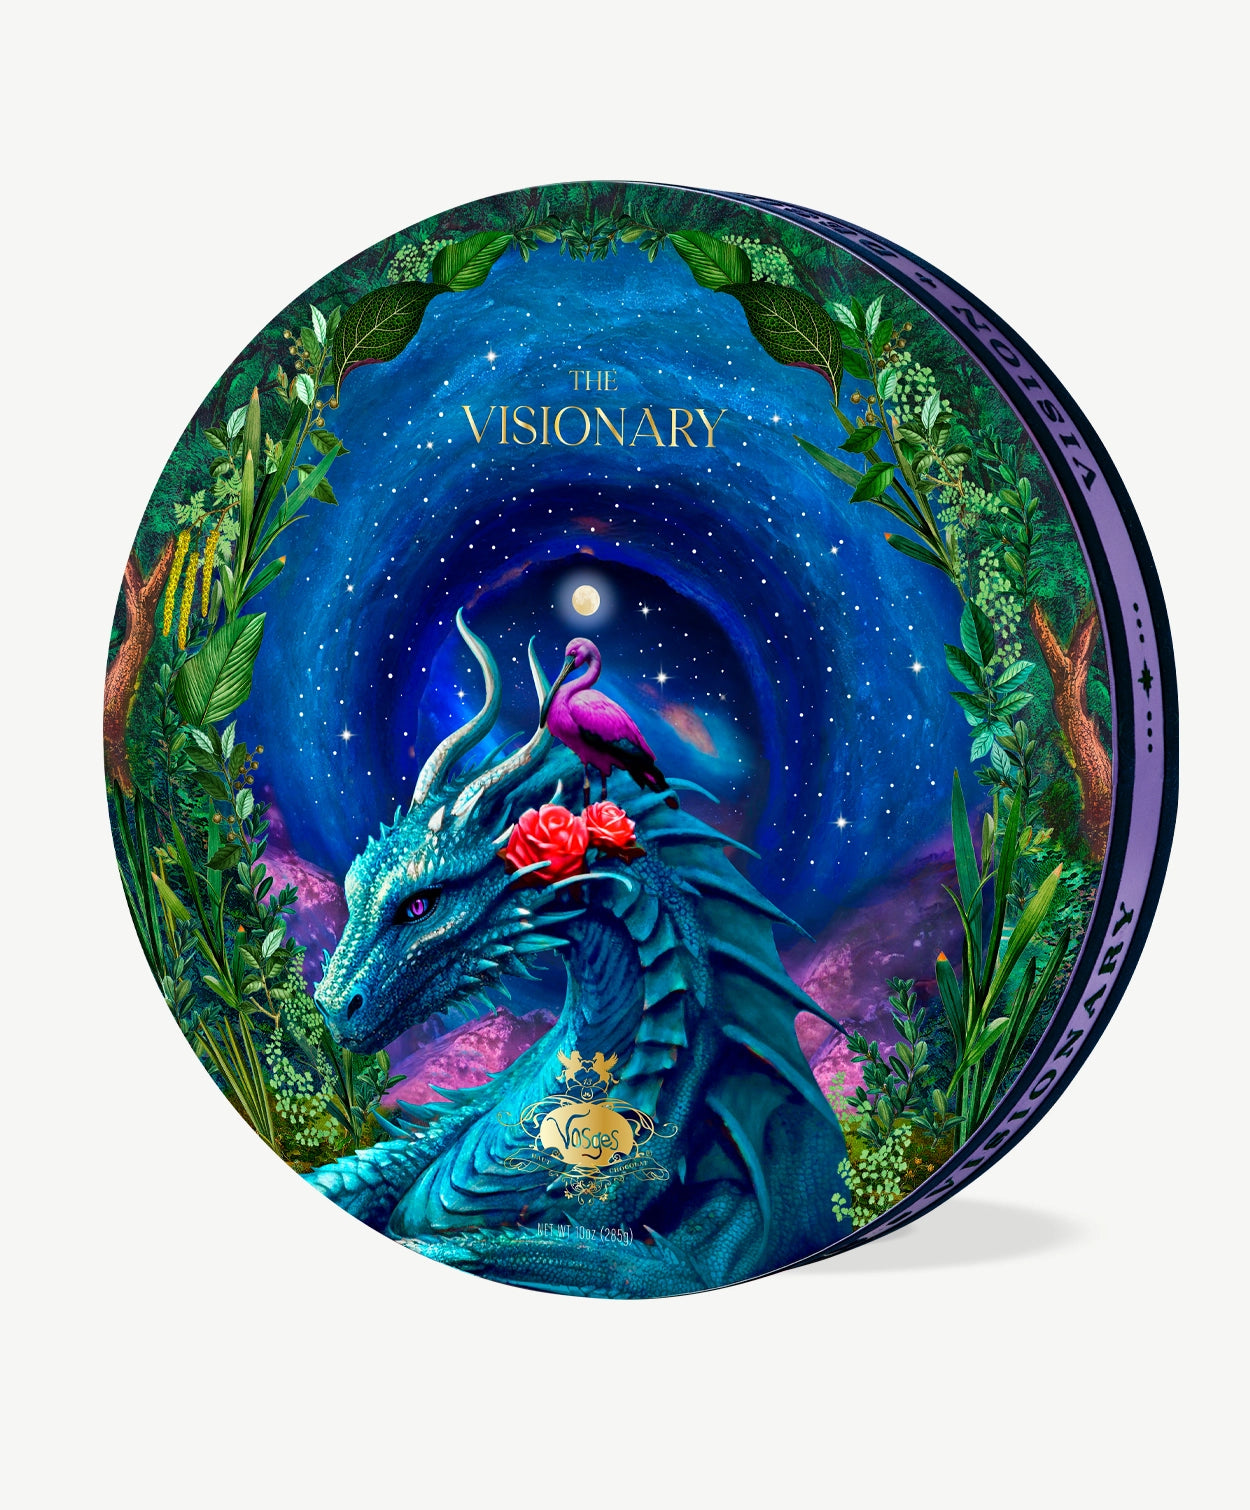 A Vosges chocolate box trimmed in purple velvet, adorned with a large blue dragon and pink egret bird surrounded by green leafy trees infront a swirling dark night sky, sits upright on a light grey background. 